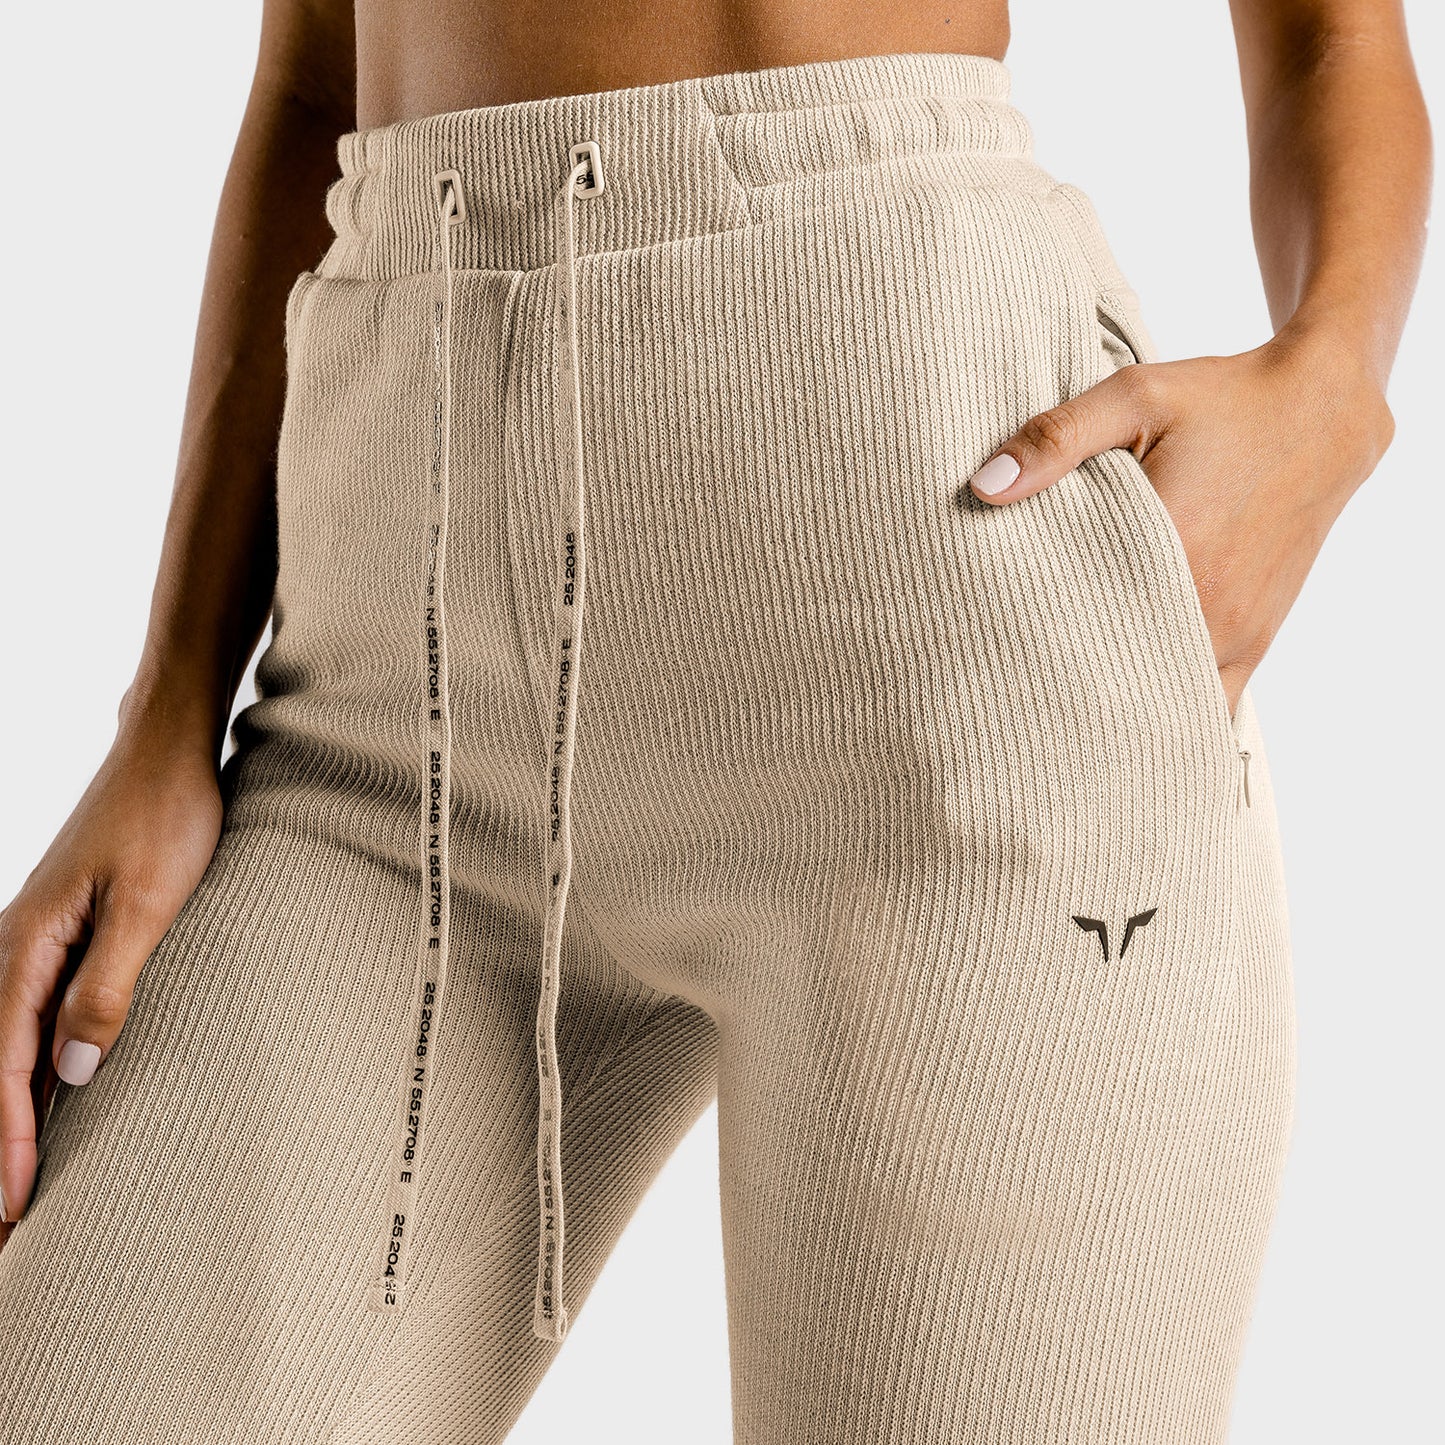 squatwolf-gym-pants-for-women-luxe-joggers-stone-workout-clothes